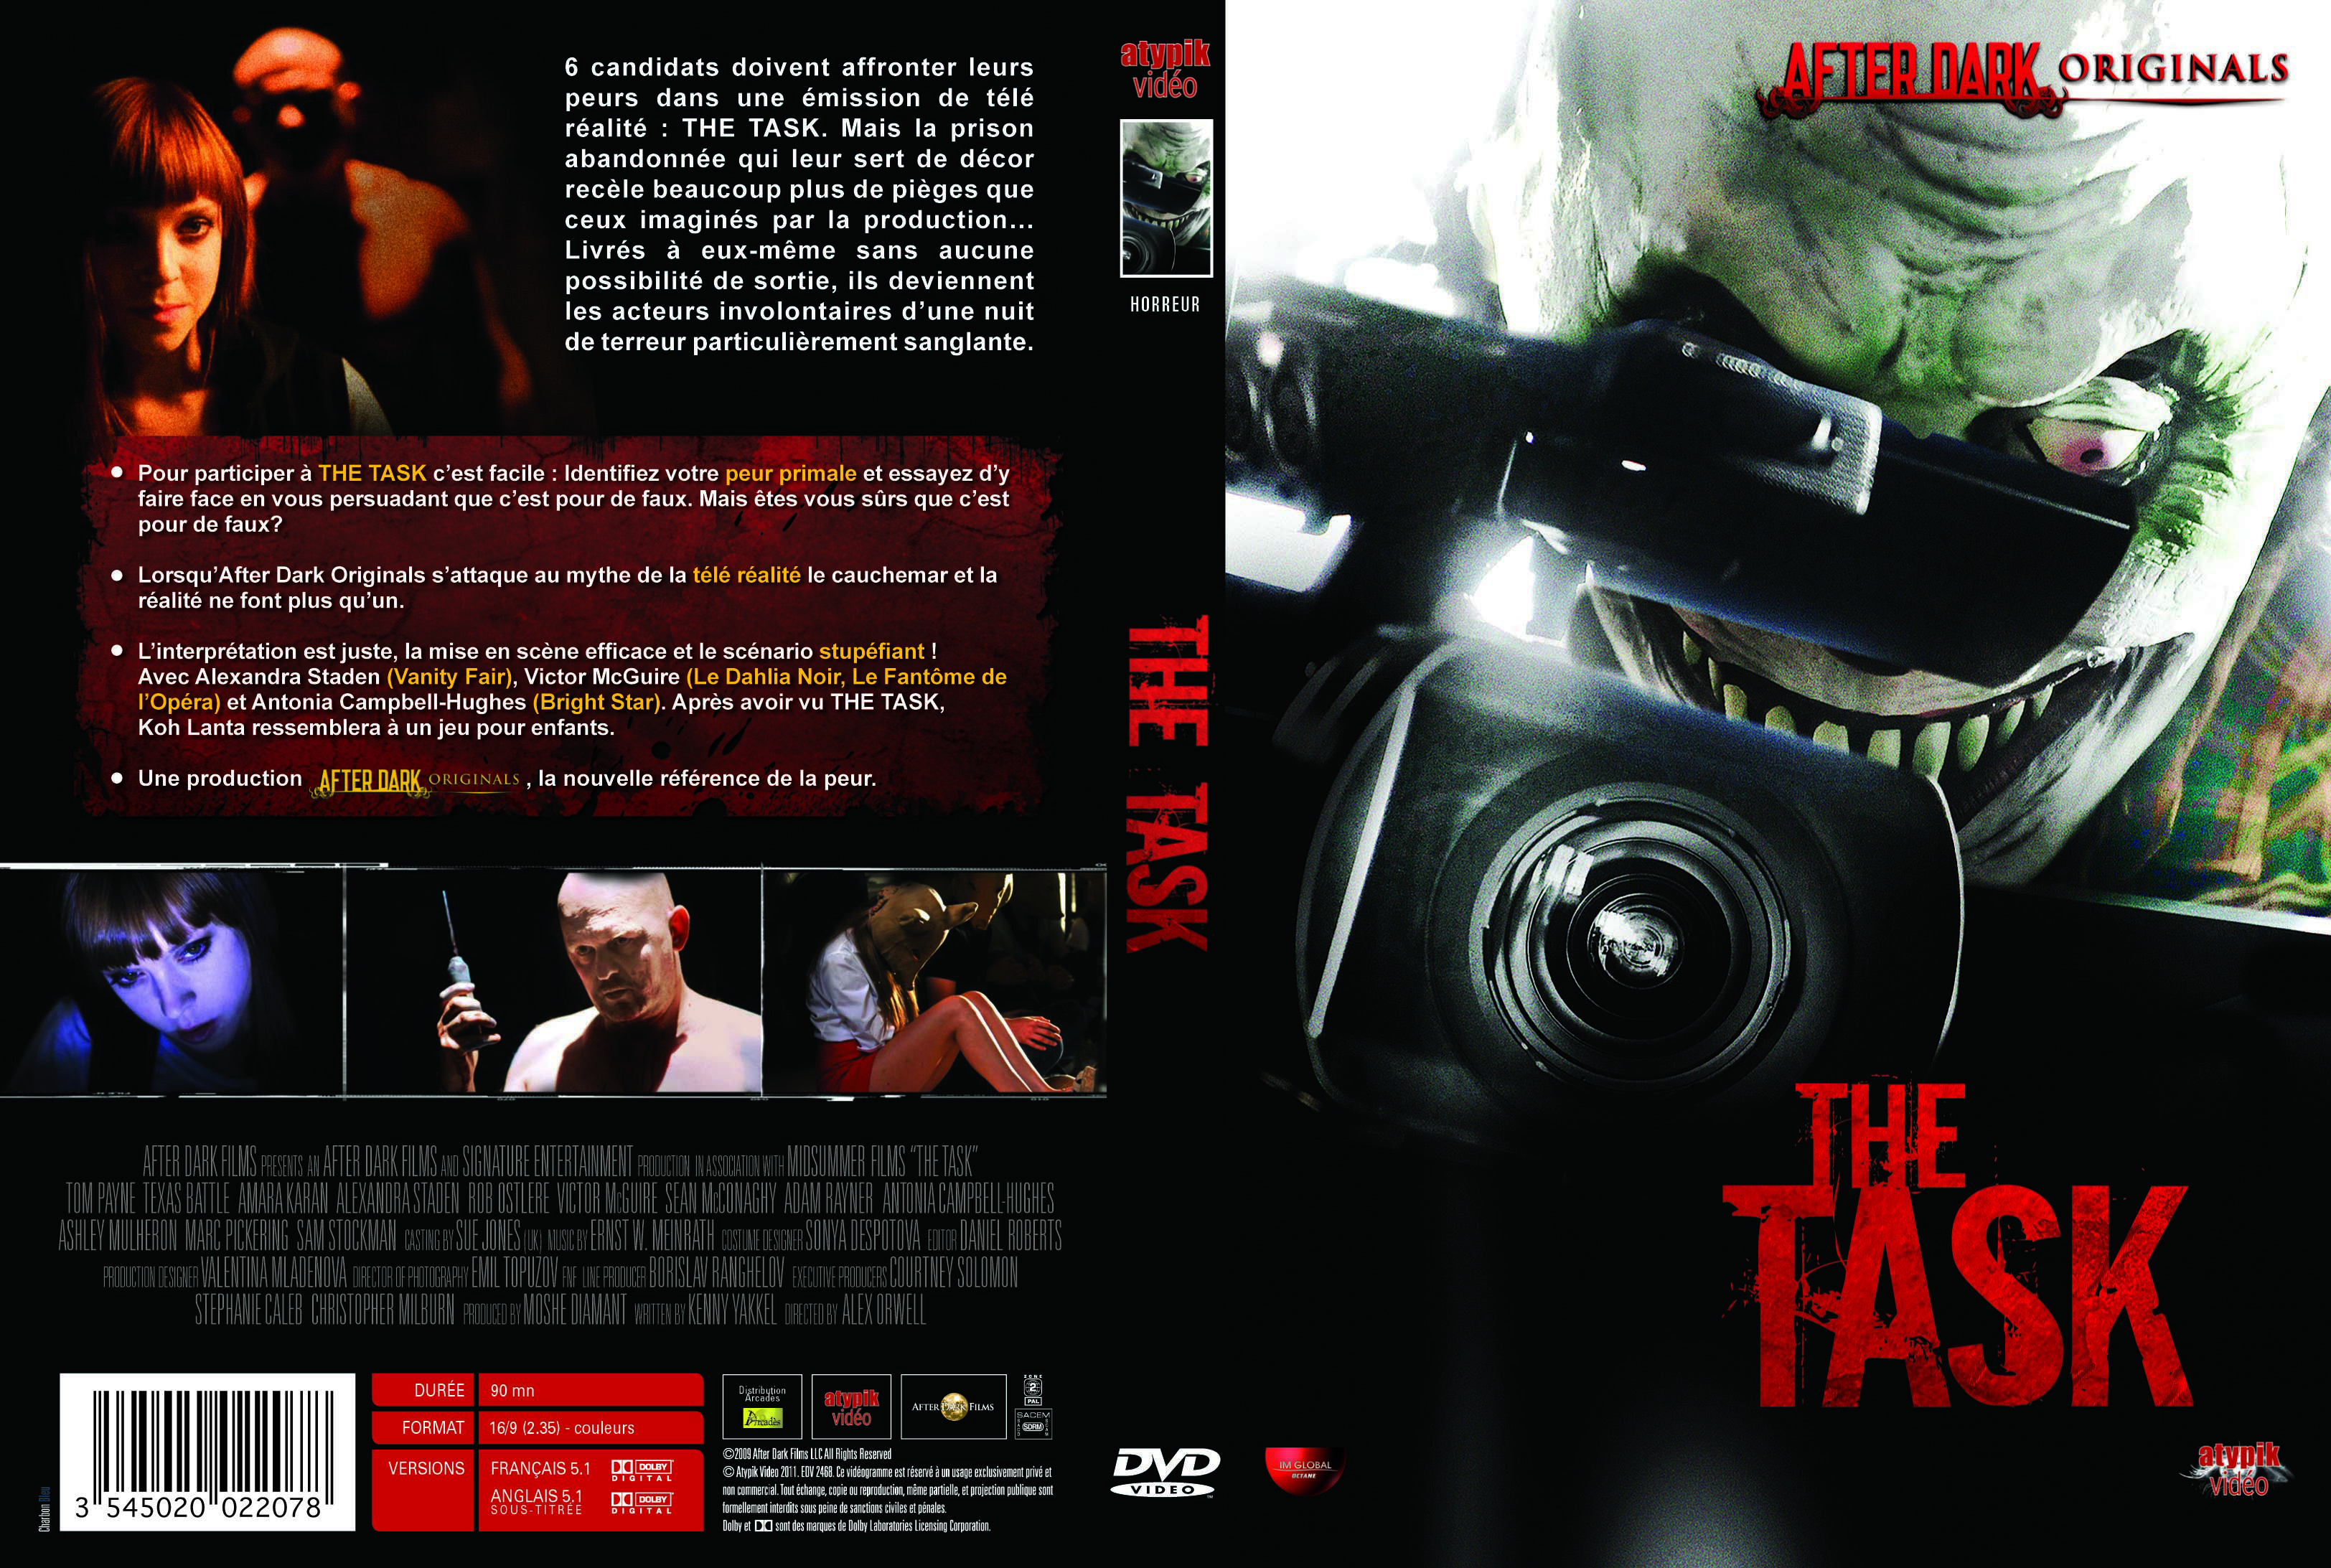 Jaquette DVD The Task